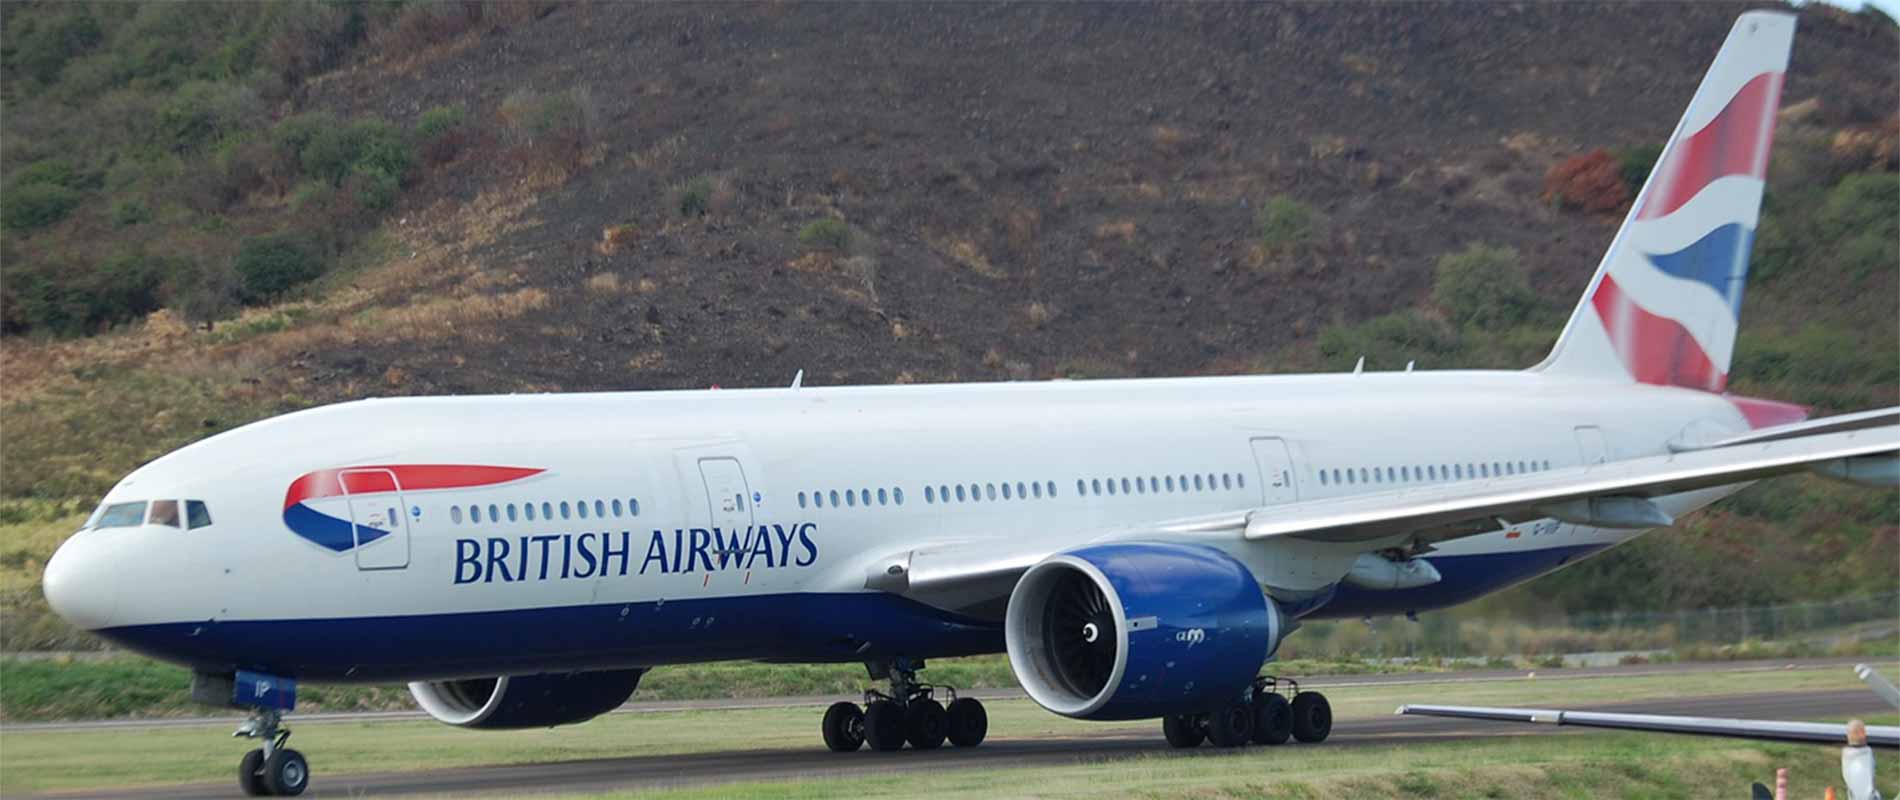 British Airways landed at St Kitts airport